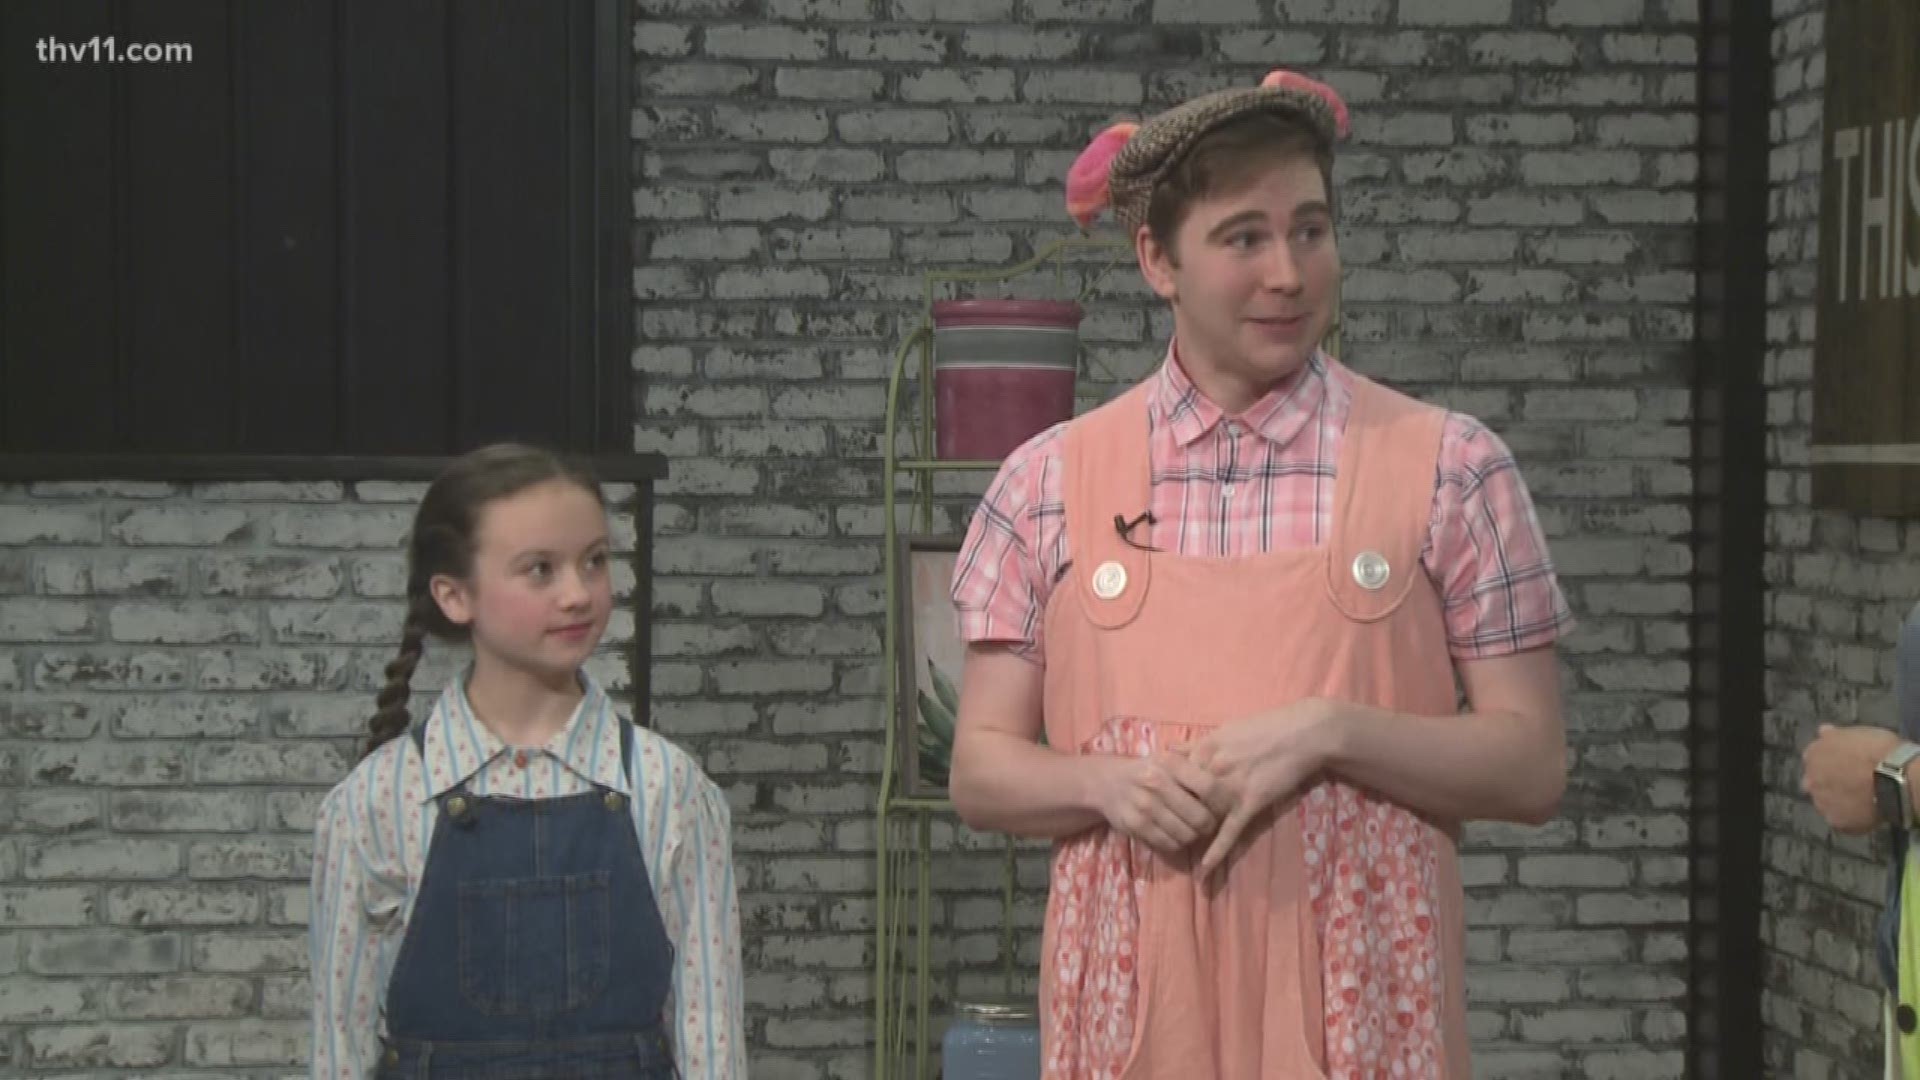 The children's classic "Charlotte's Web" is coming to life at the Arkansas Arts Center and it stars some talented youngsters.